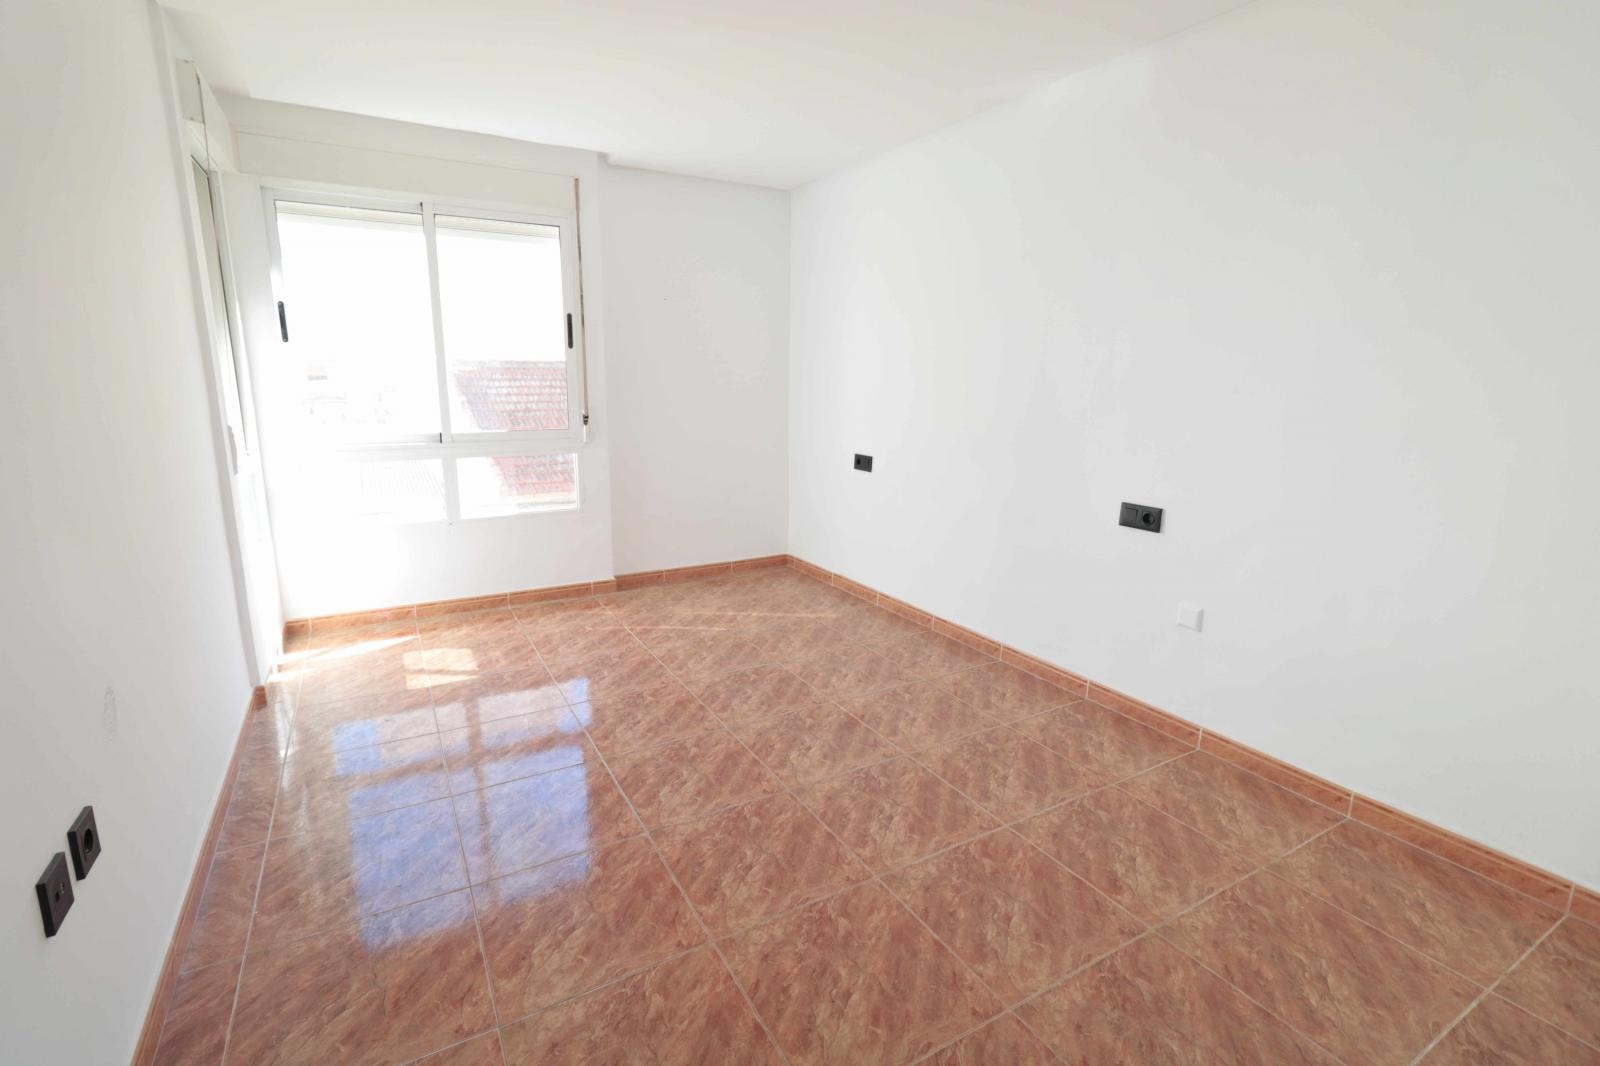 SPACIOUS 4-BEDROOM APARTMENT VERY CENTRALLY LOCATED